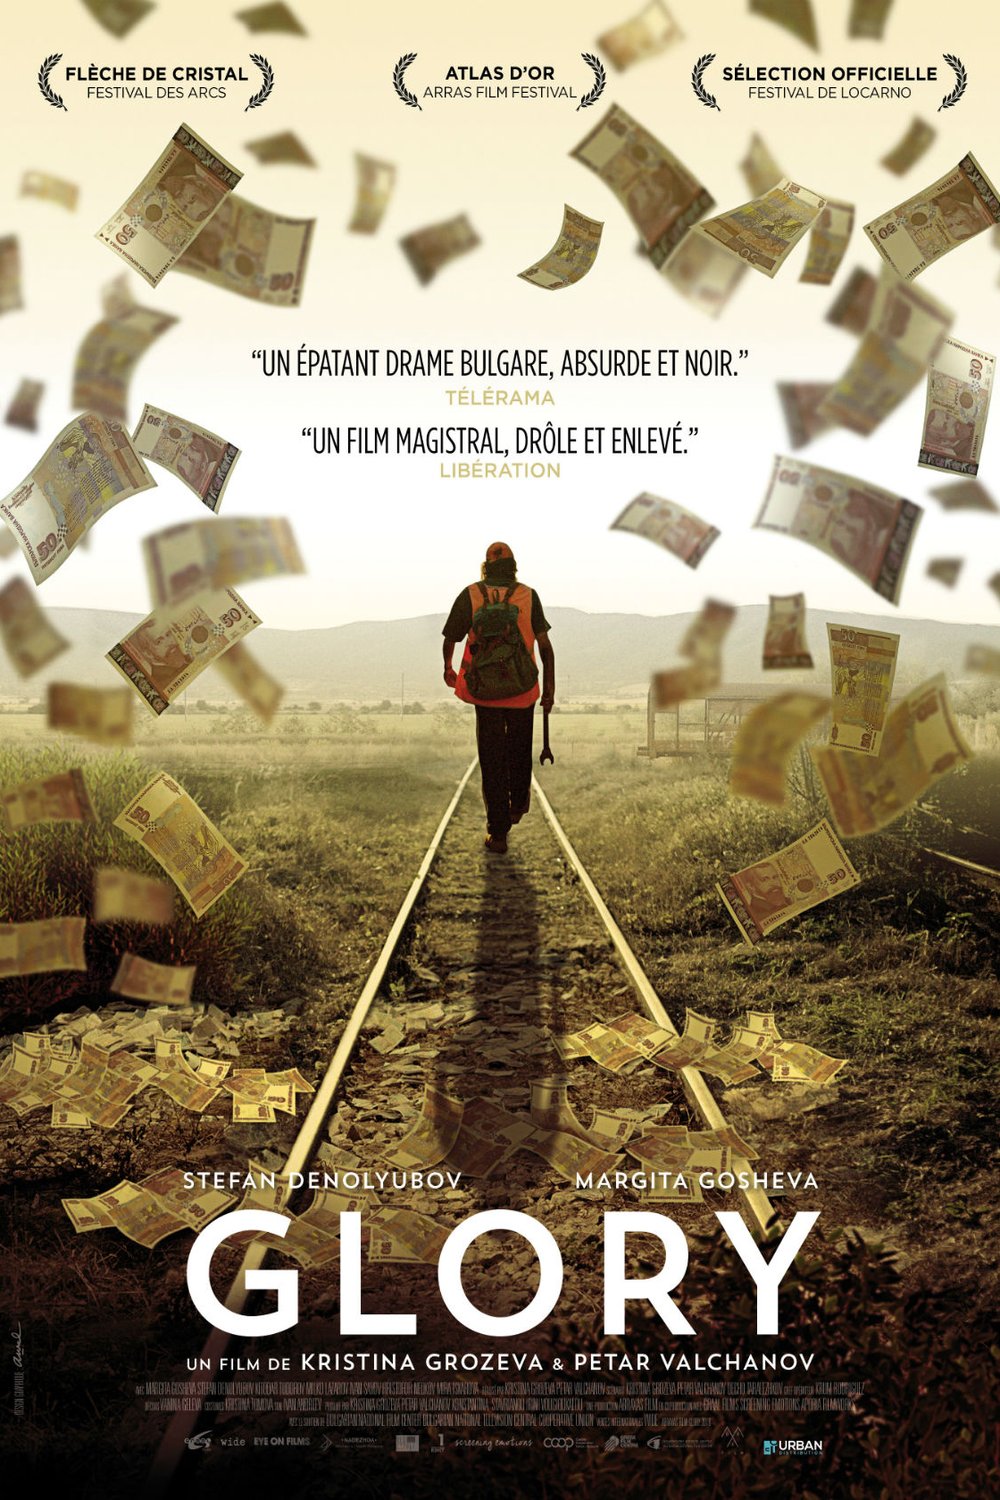 Poster of the movie Glory v.f.